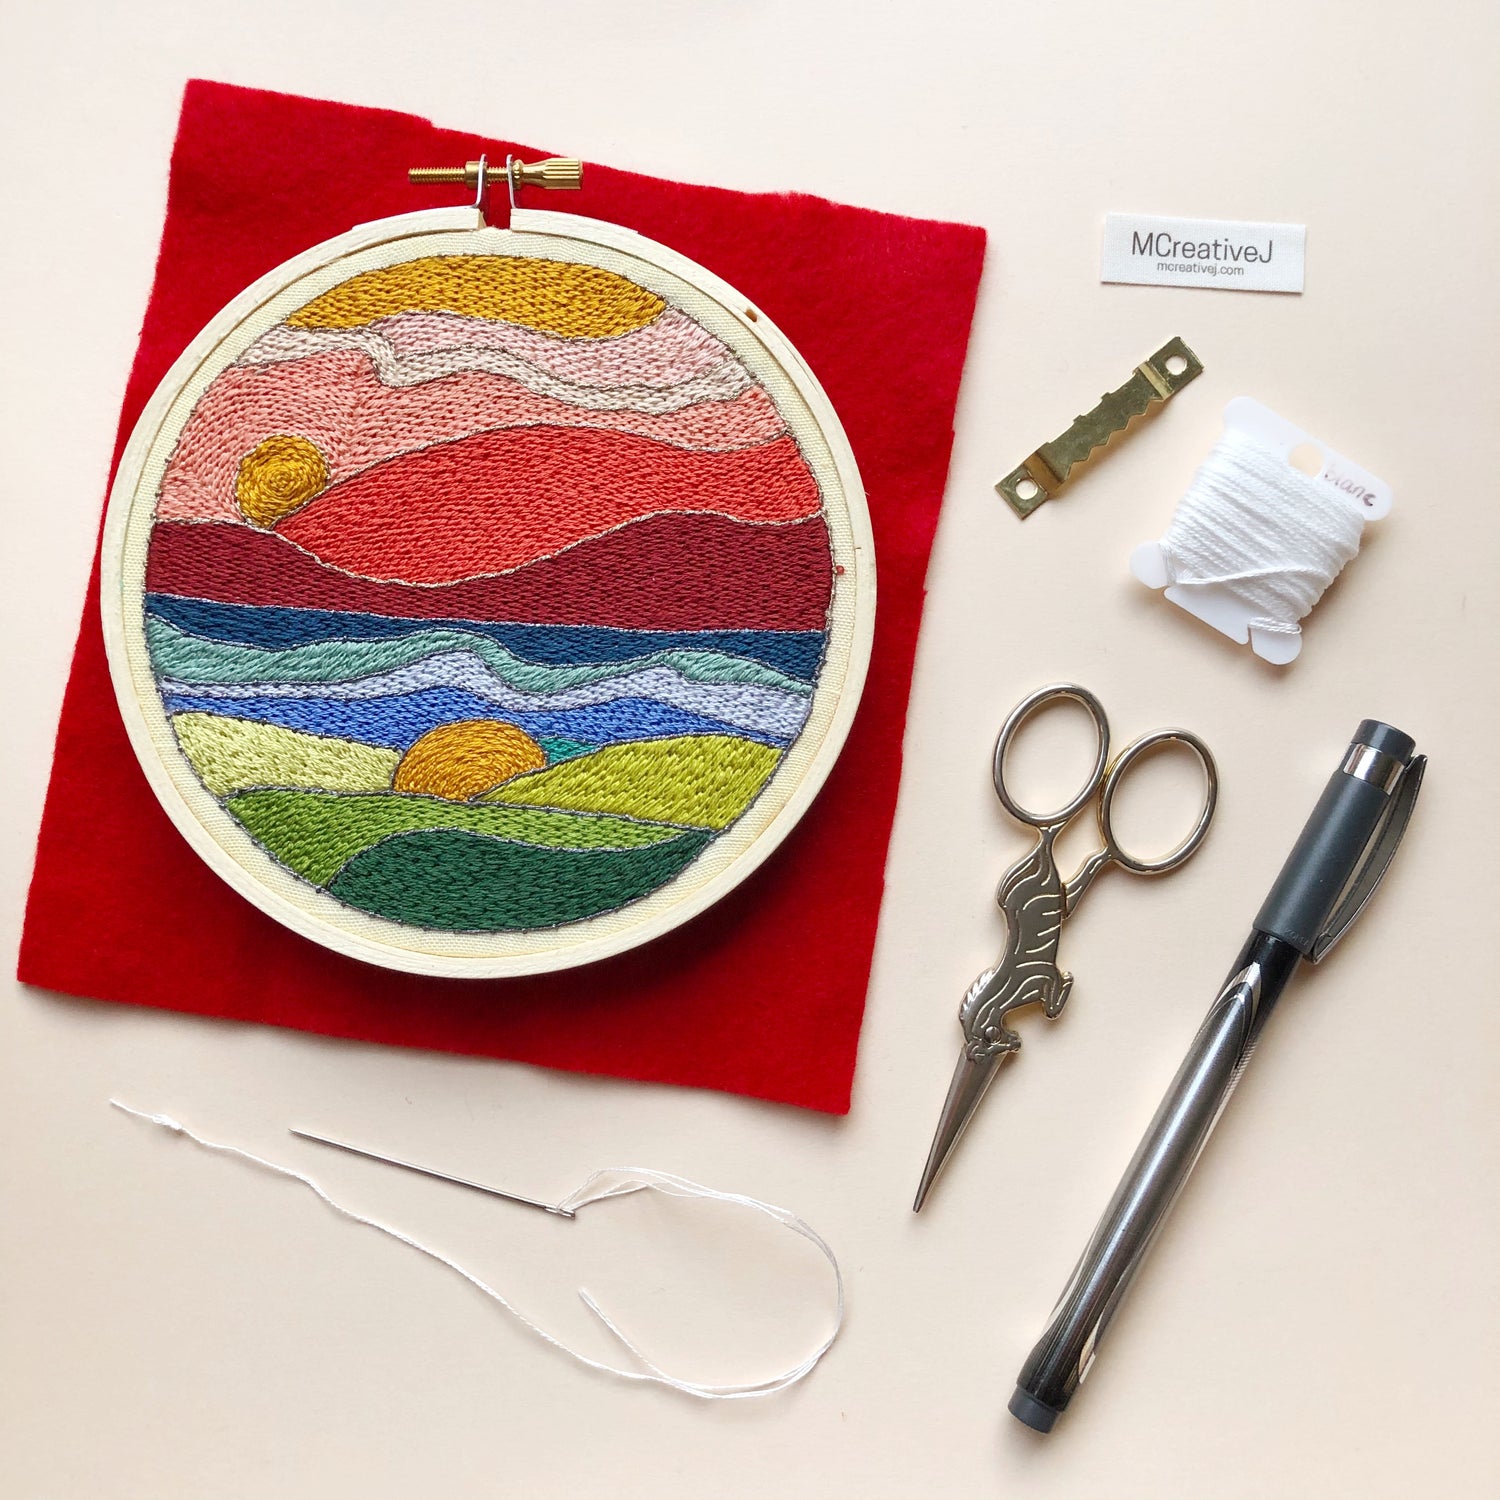 Stained Glass Landscape- Intermediate DIY Embroidery Kit – MCreativeJ